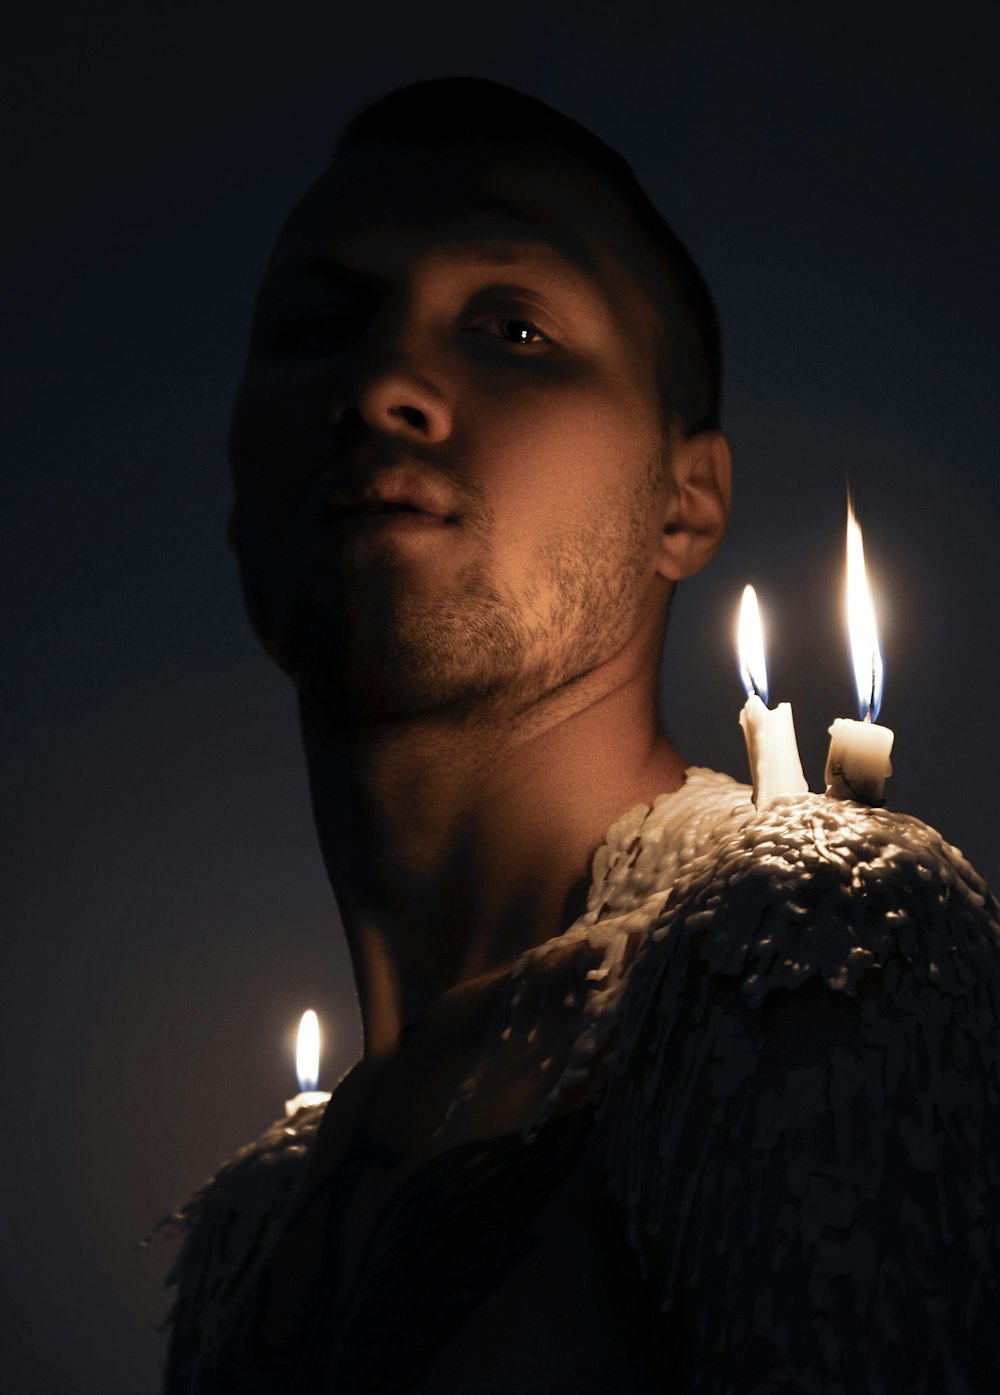 a man holding a lit candle in his hand